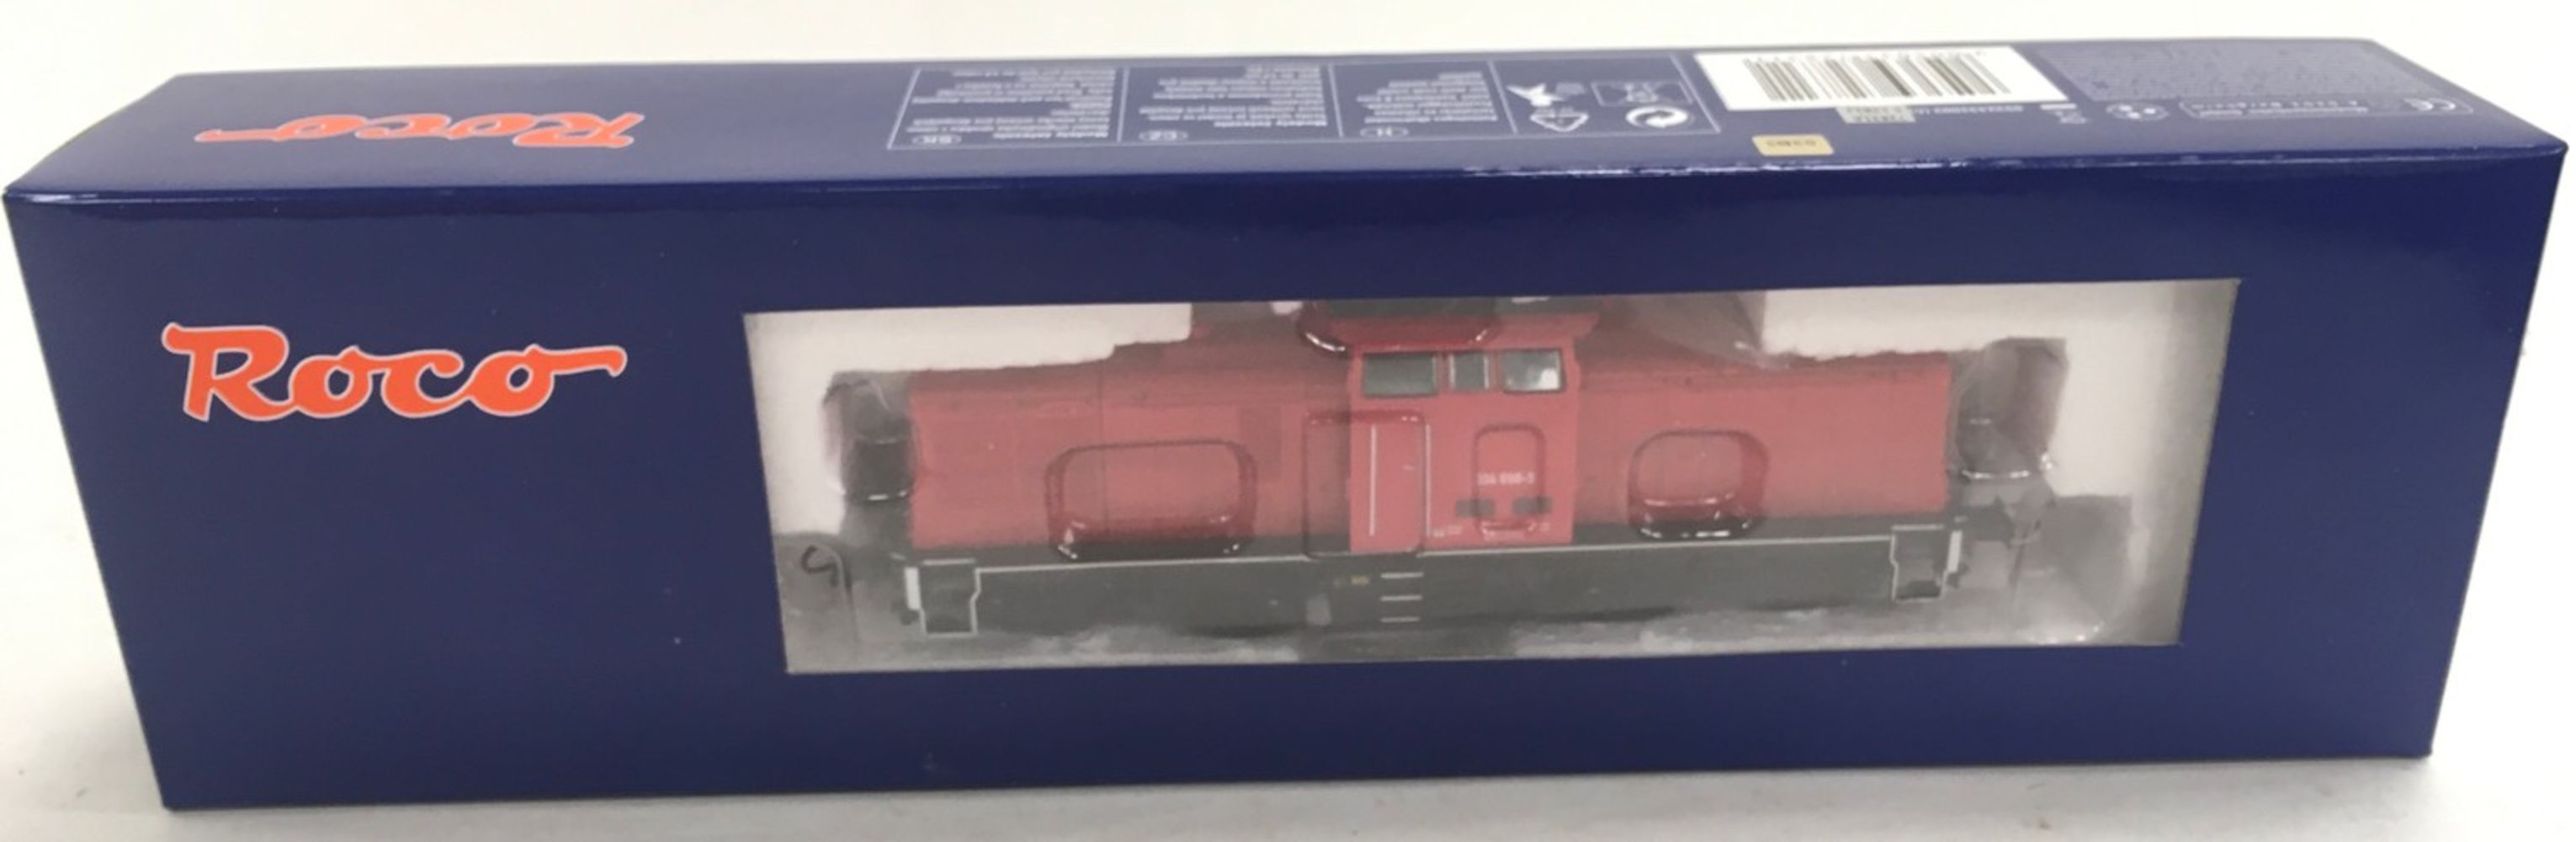 Collectable Toys and Model Railway Auction